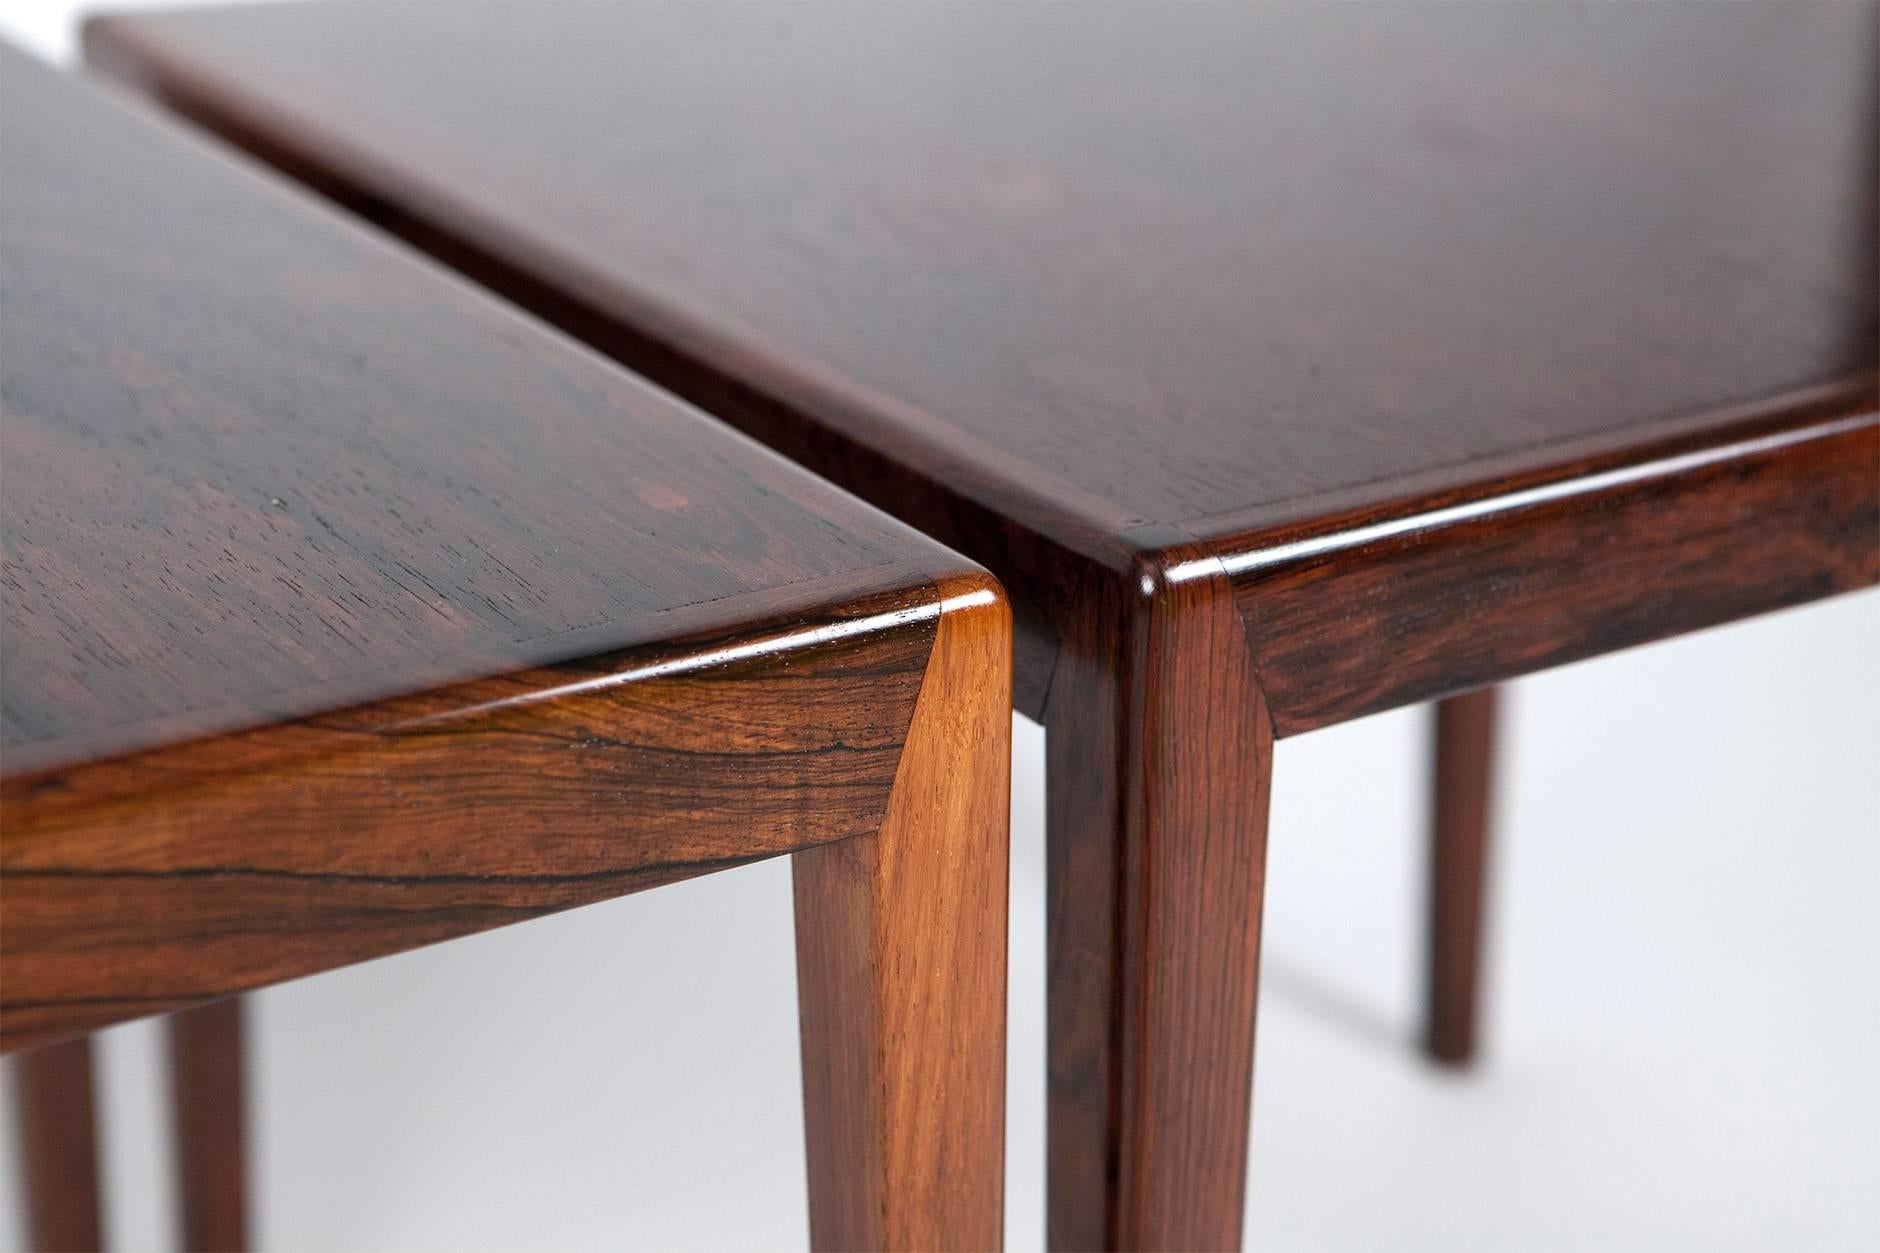 Pair of side tables from unknown Danish cabinet maker, circa 1960. Constructed from Brazilian rosewood.